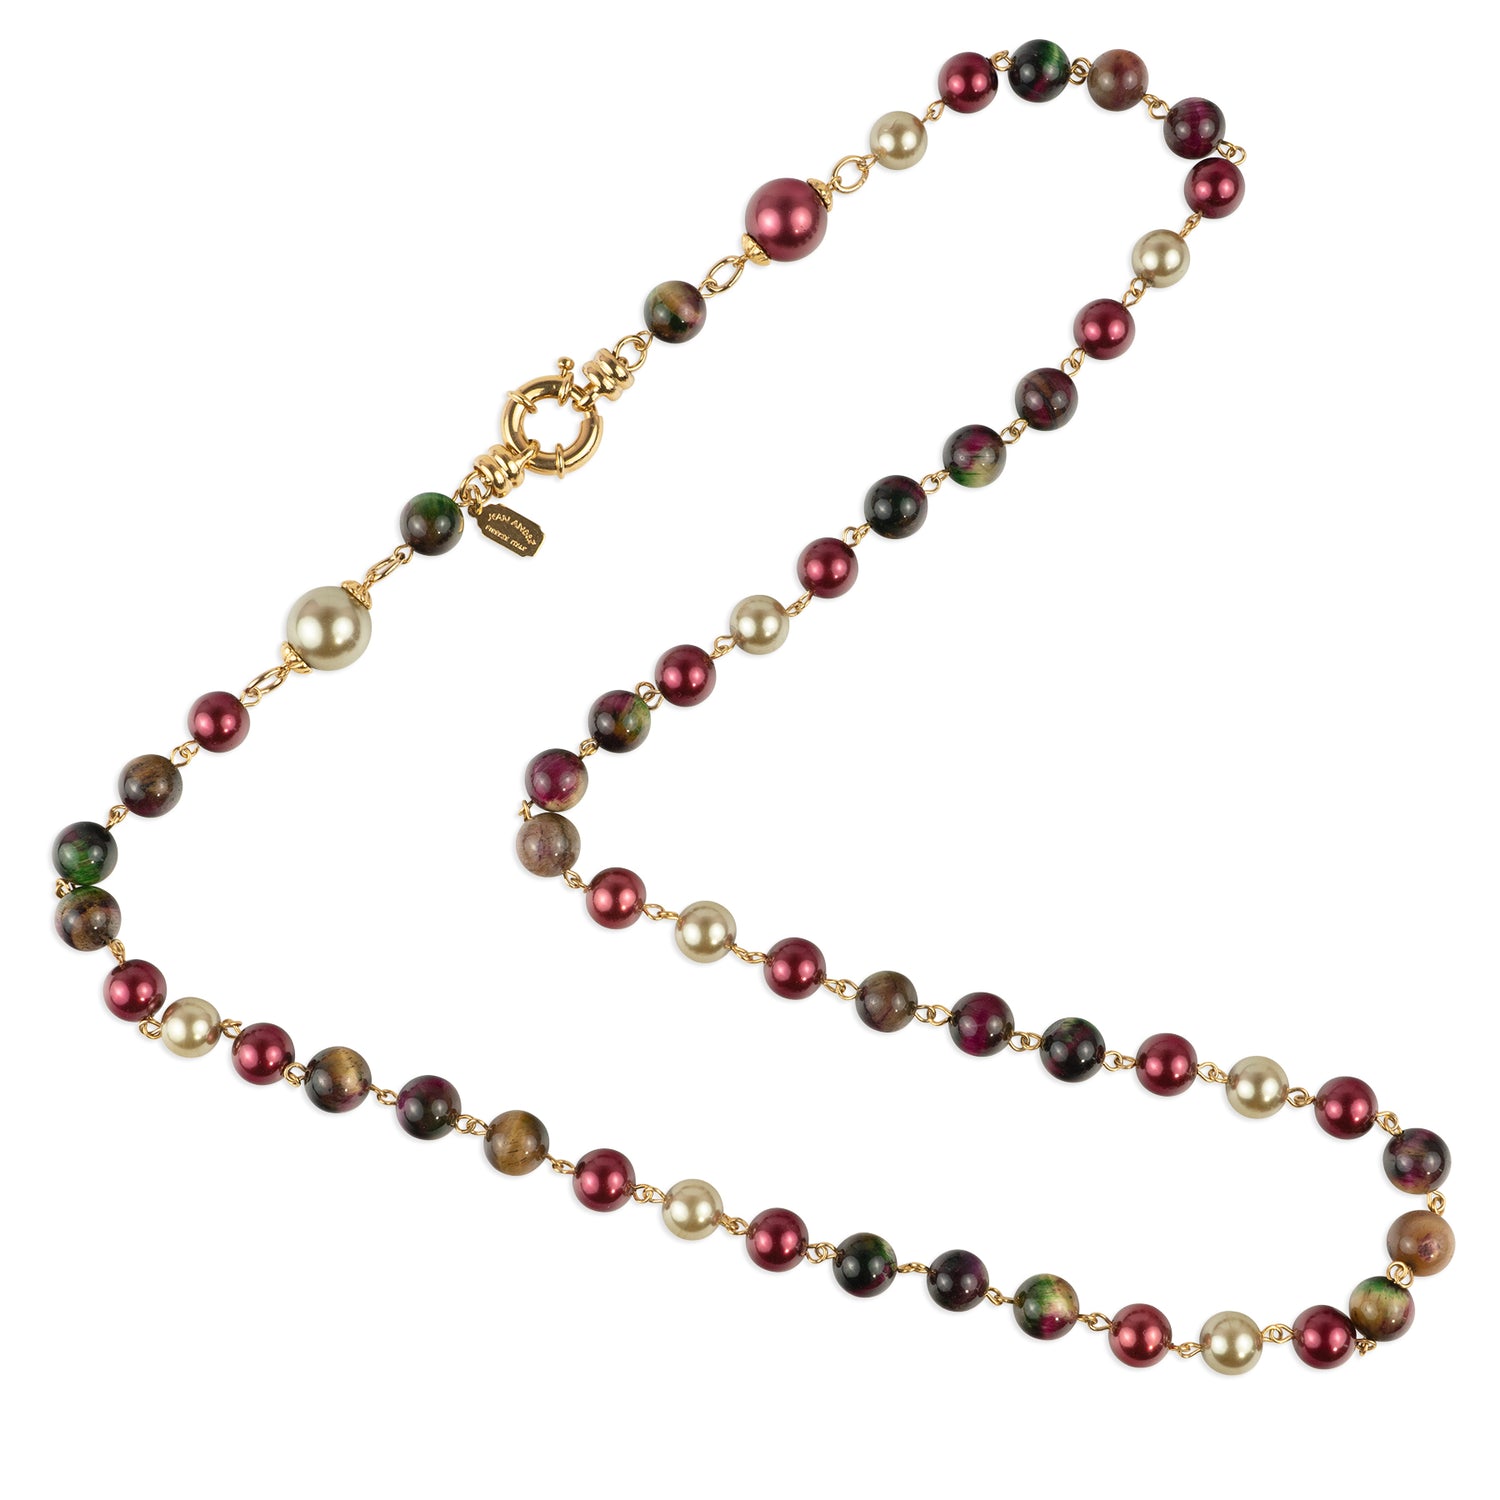 Necklace with snap clasp in semi-precious stones and pearls